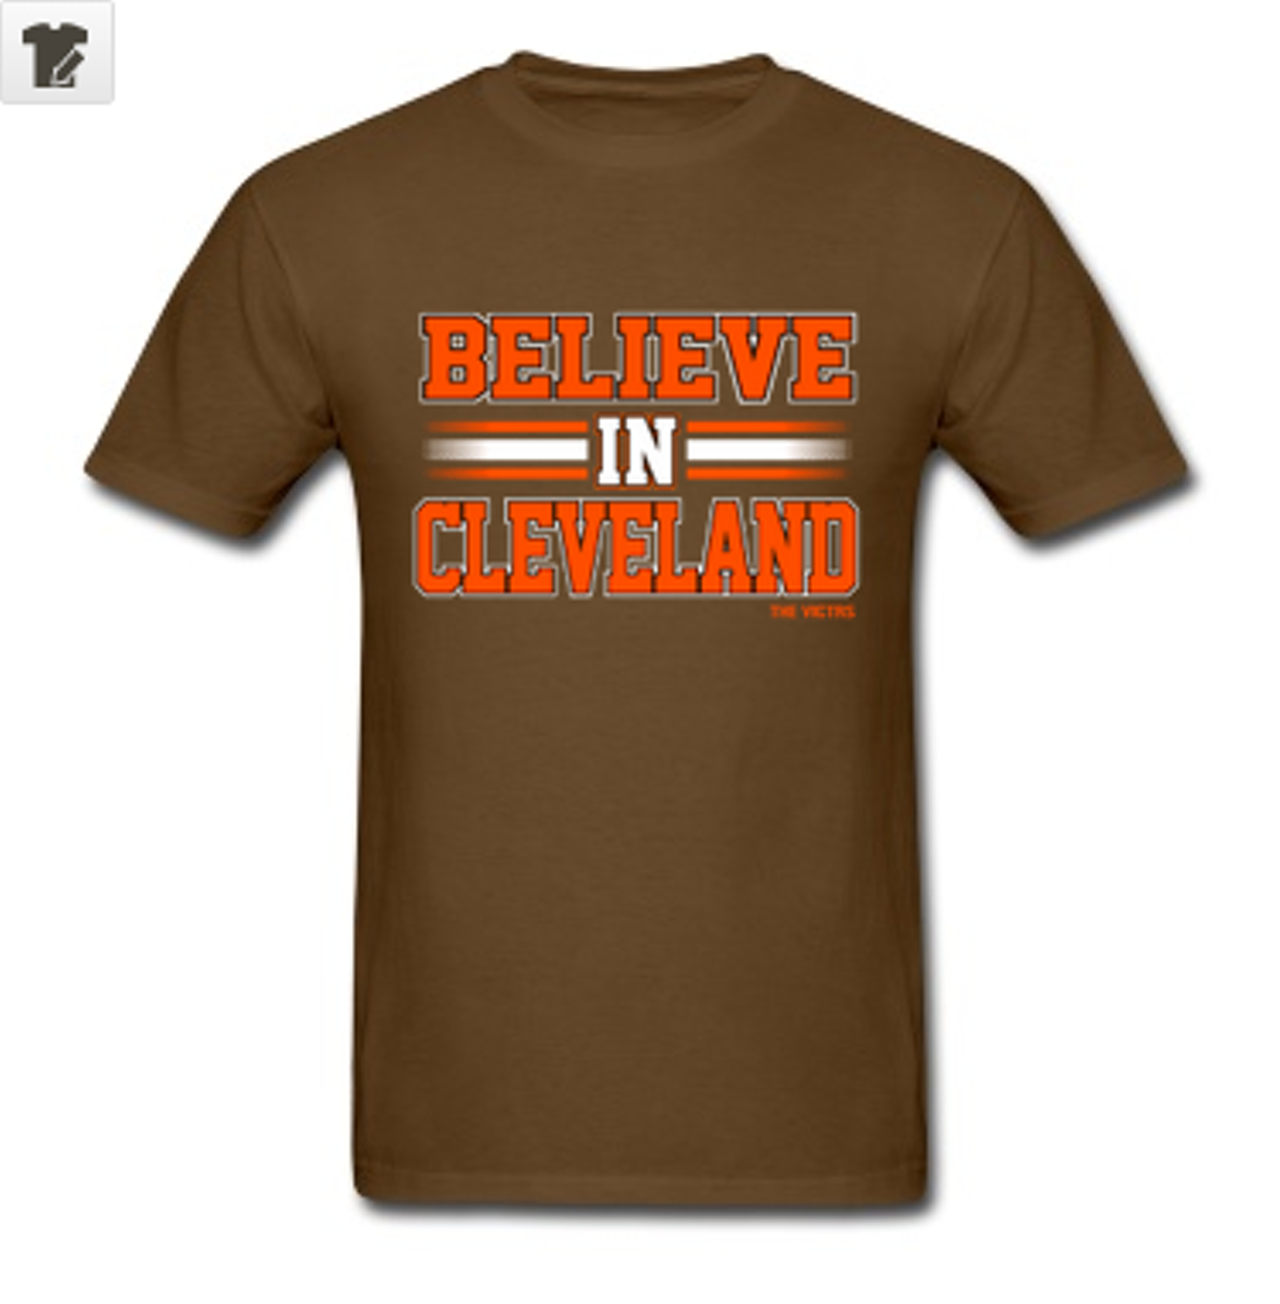 Because we never stop believin'. Design by Spreadshirt.com